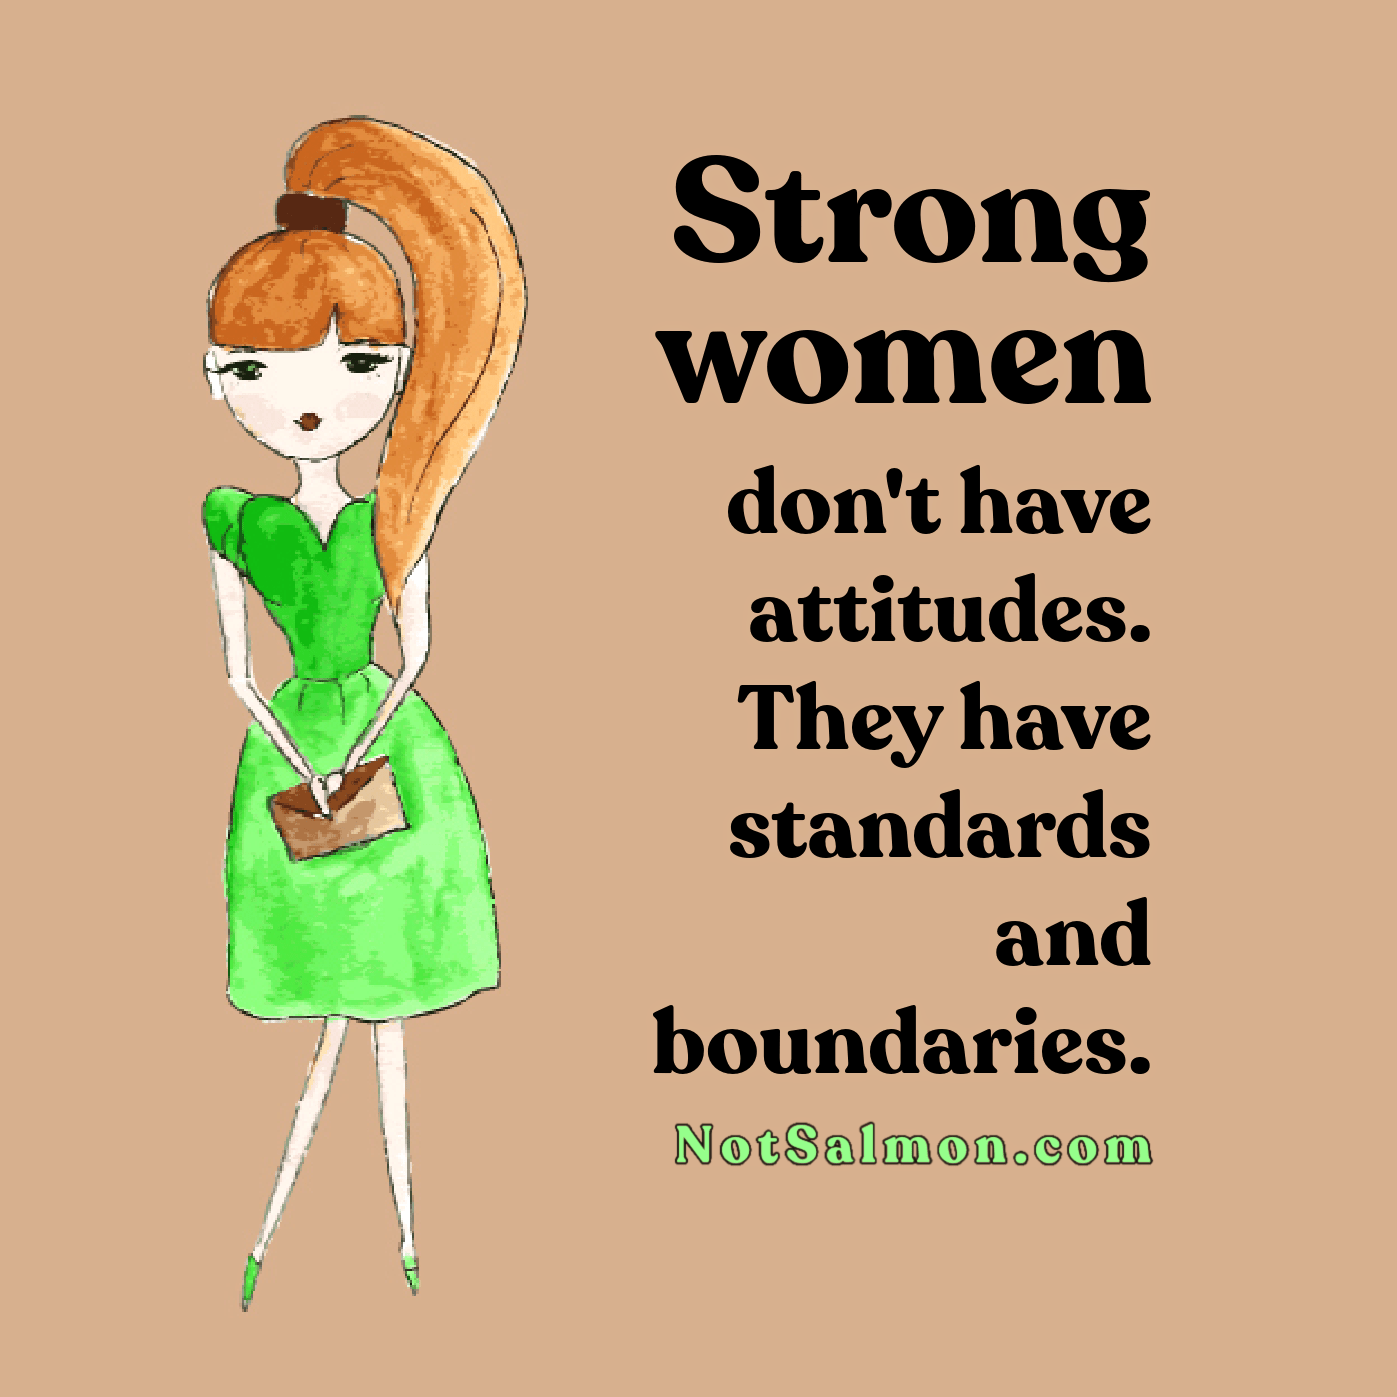 https://www.notsalmon.com/wp-content/uploads/2021/06/quote-strong-women-standards-boundaries-square.png